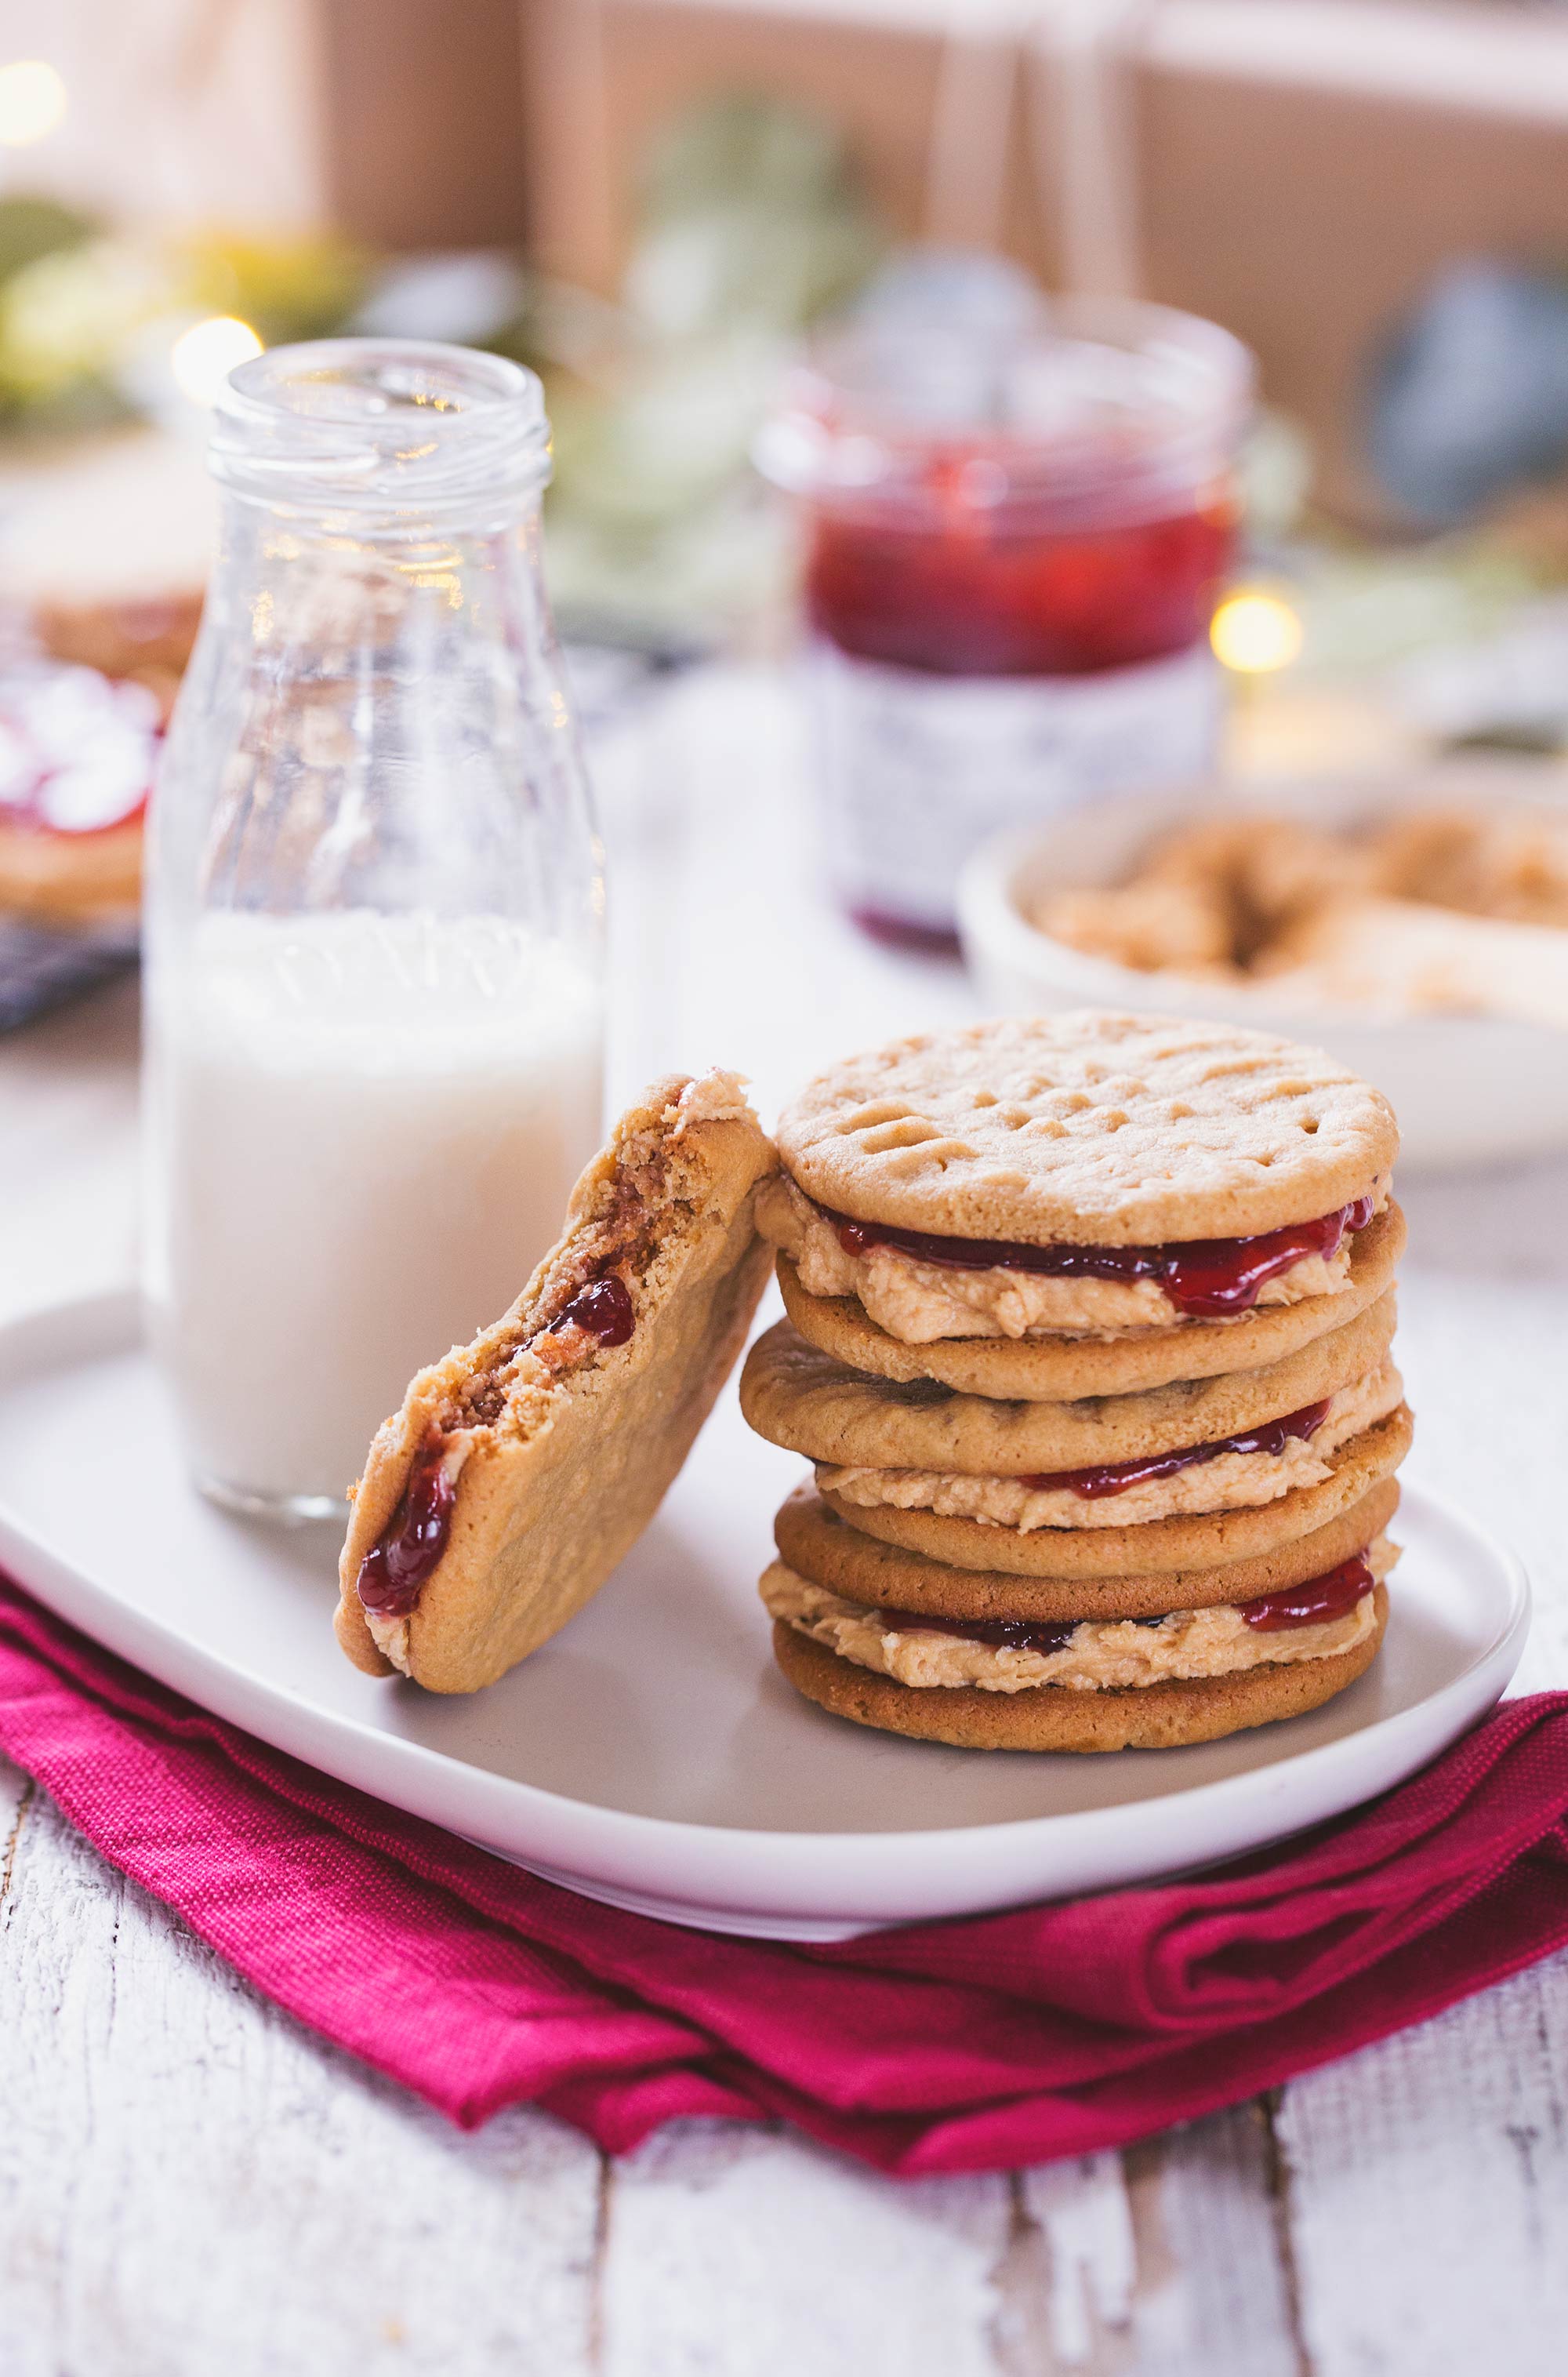 Peanut Butter & Bonne Maman Jelly Filled Cookies